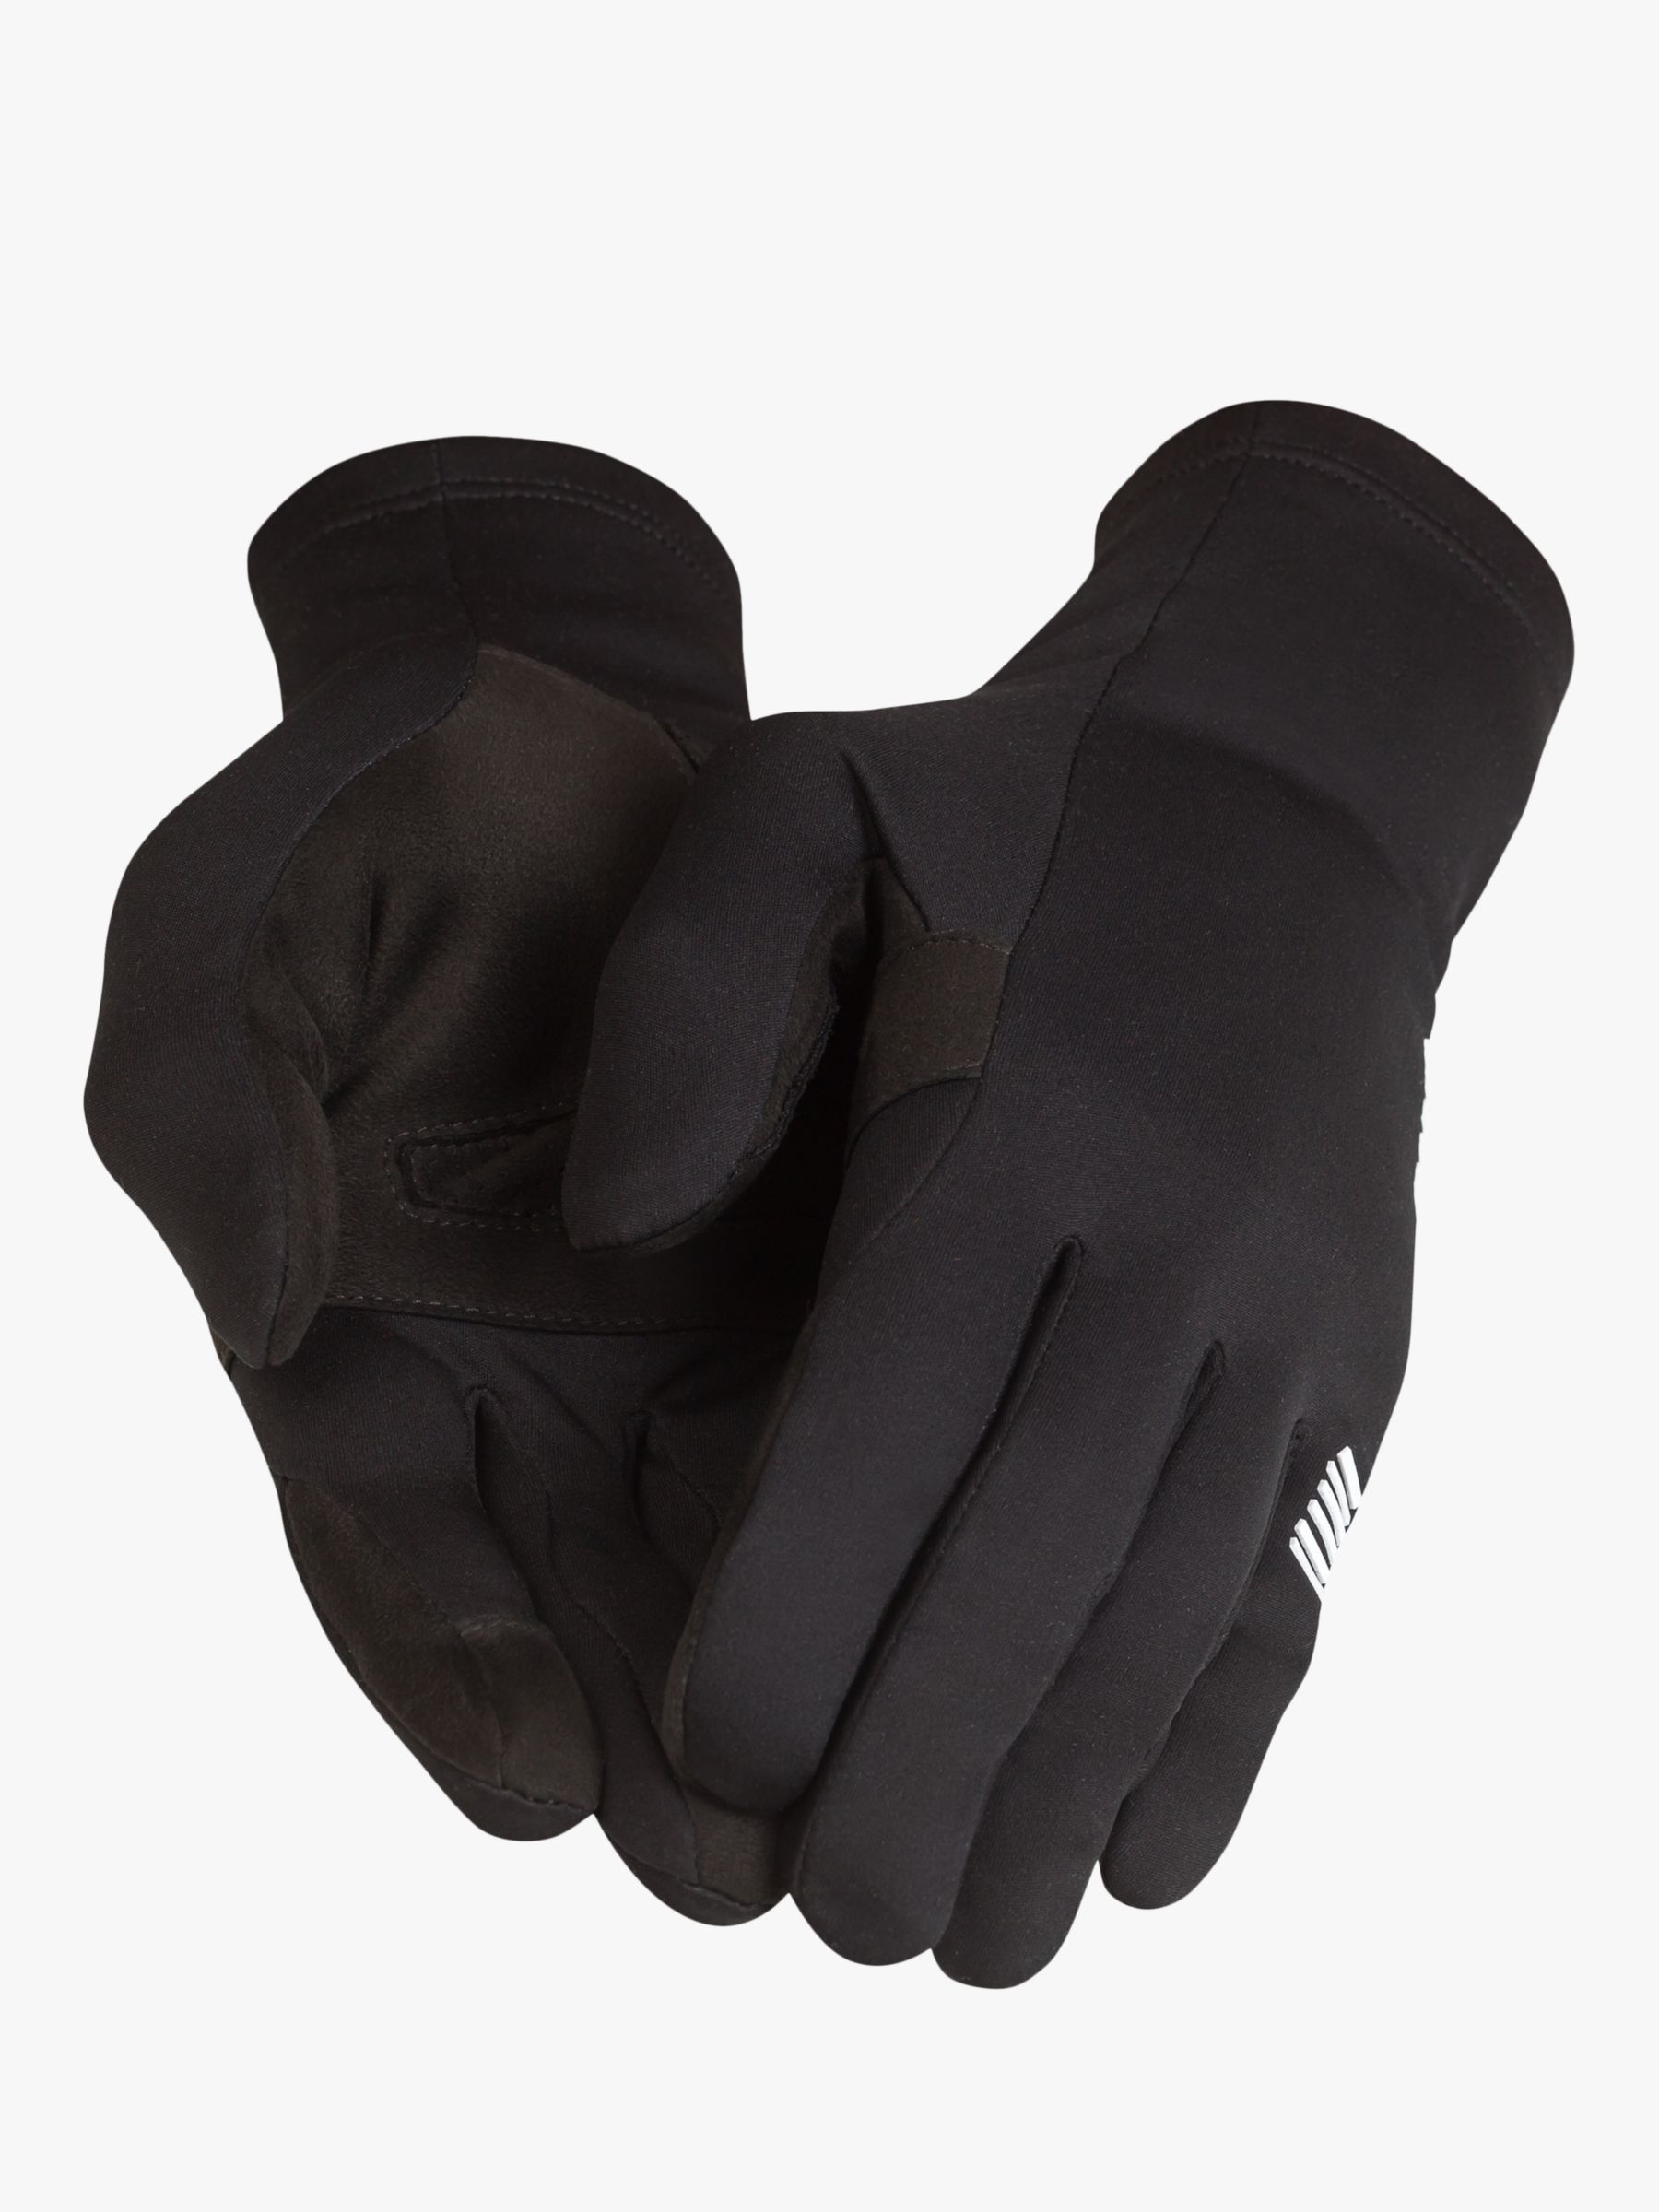 Rapha Pro Team Men's Cycling Gloves at 